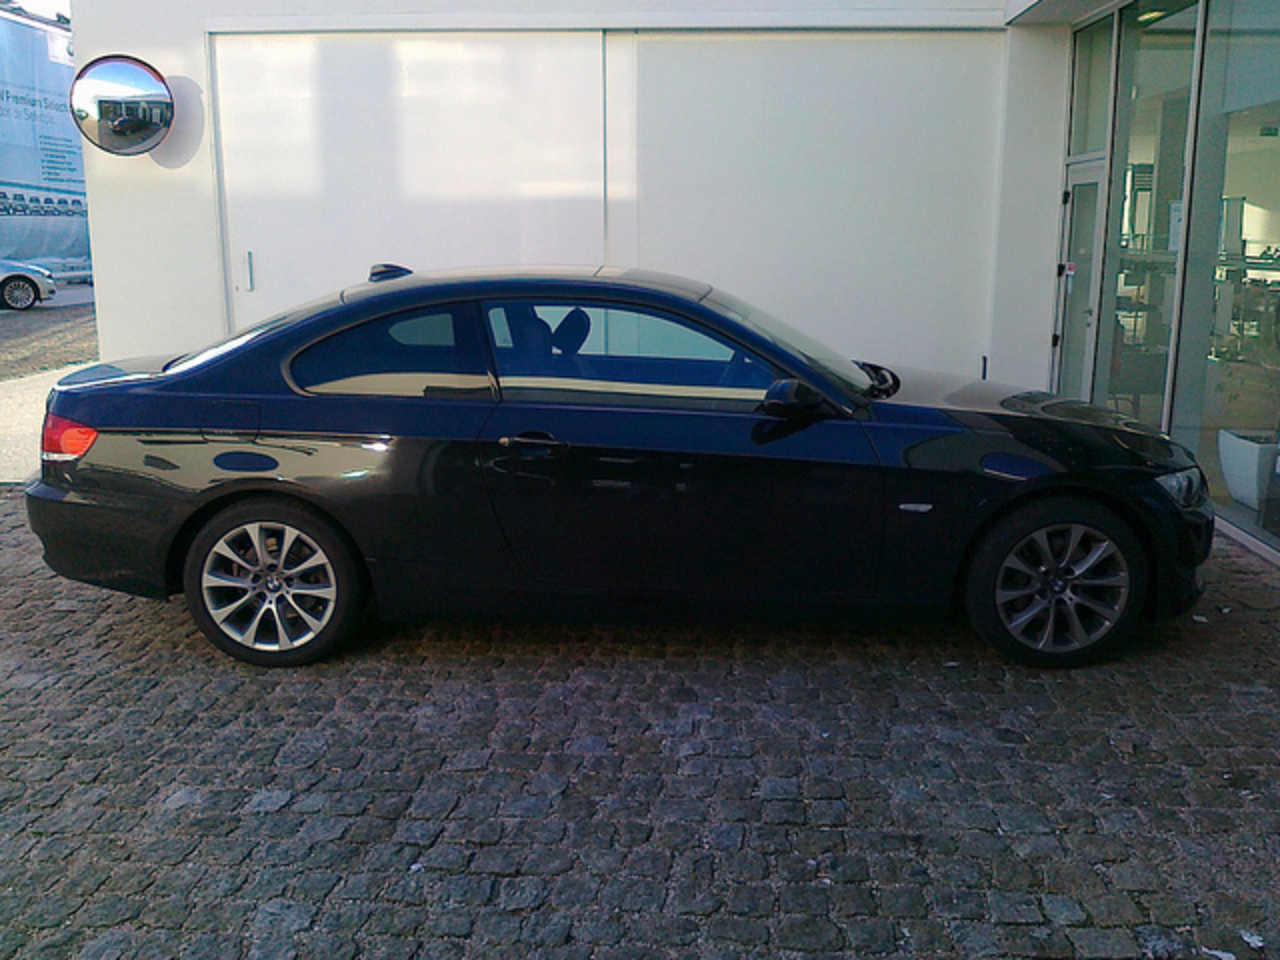 BMW 320d coupe | Flickr - Photo Sharing!